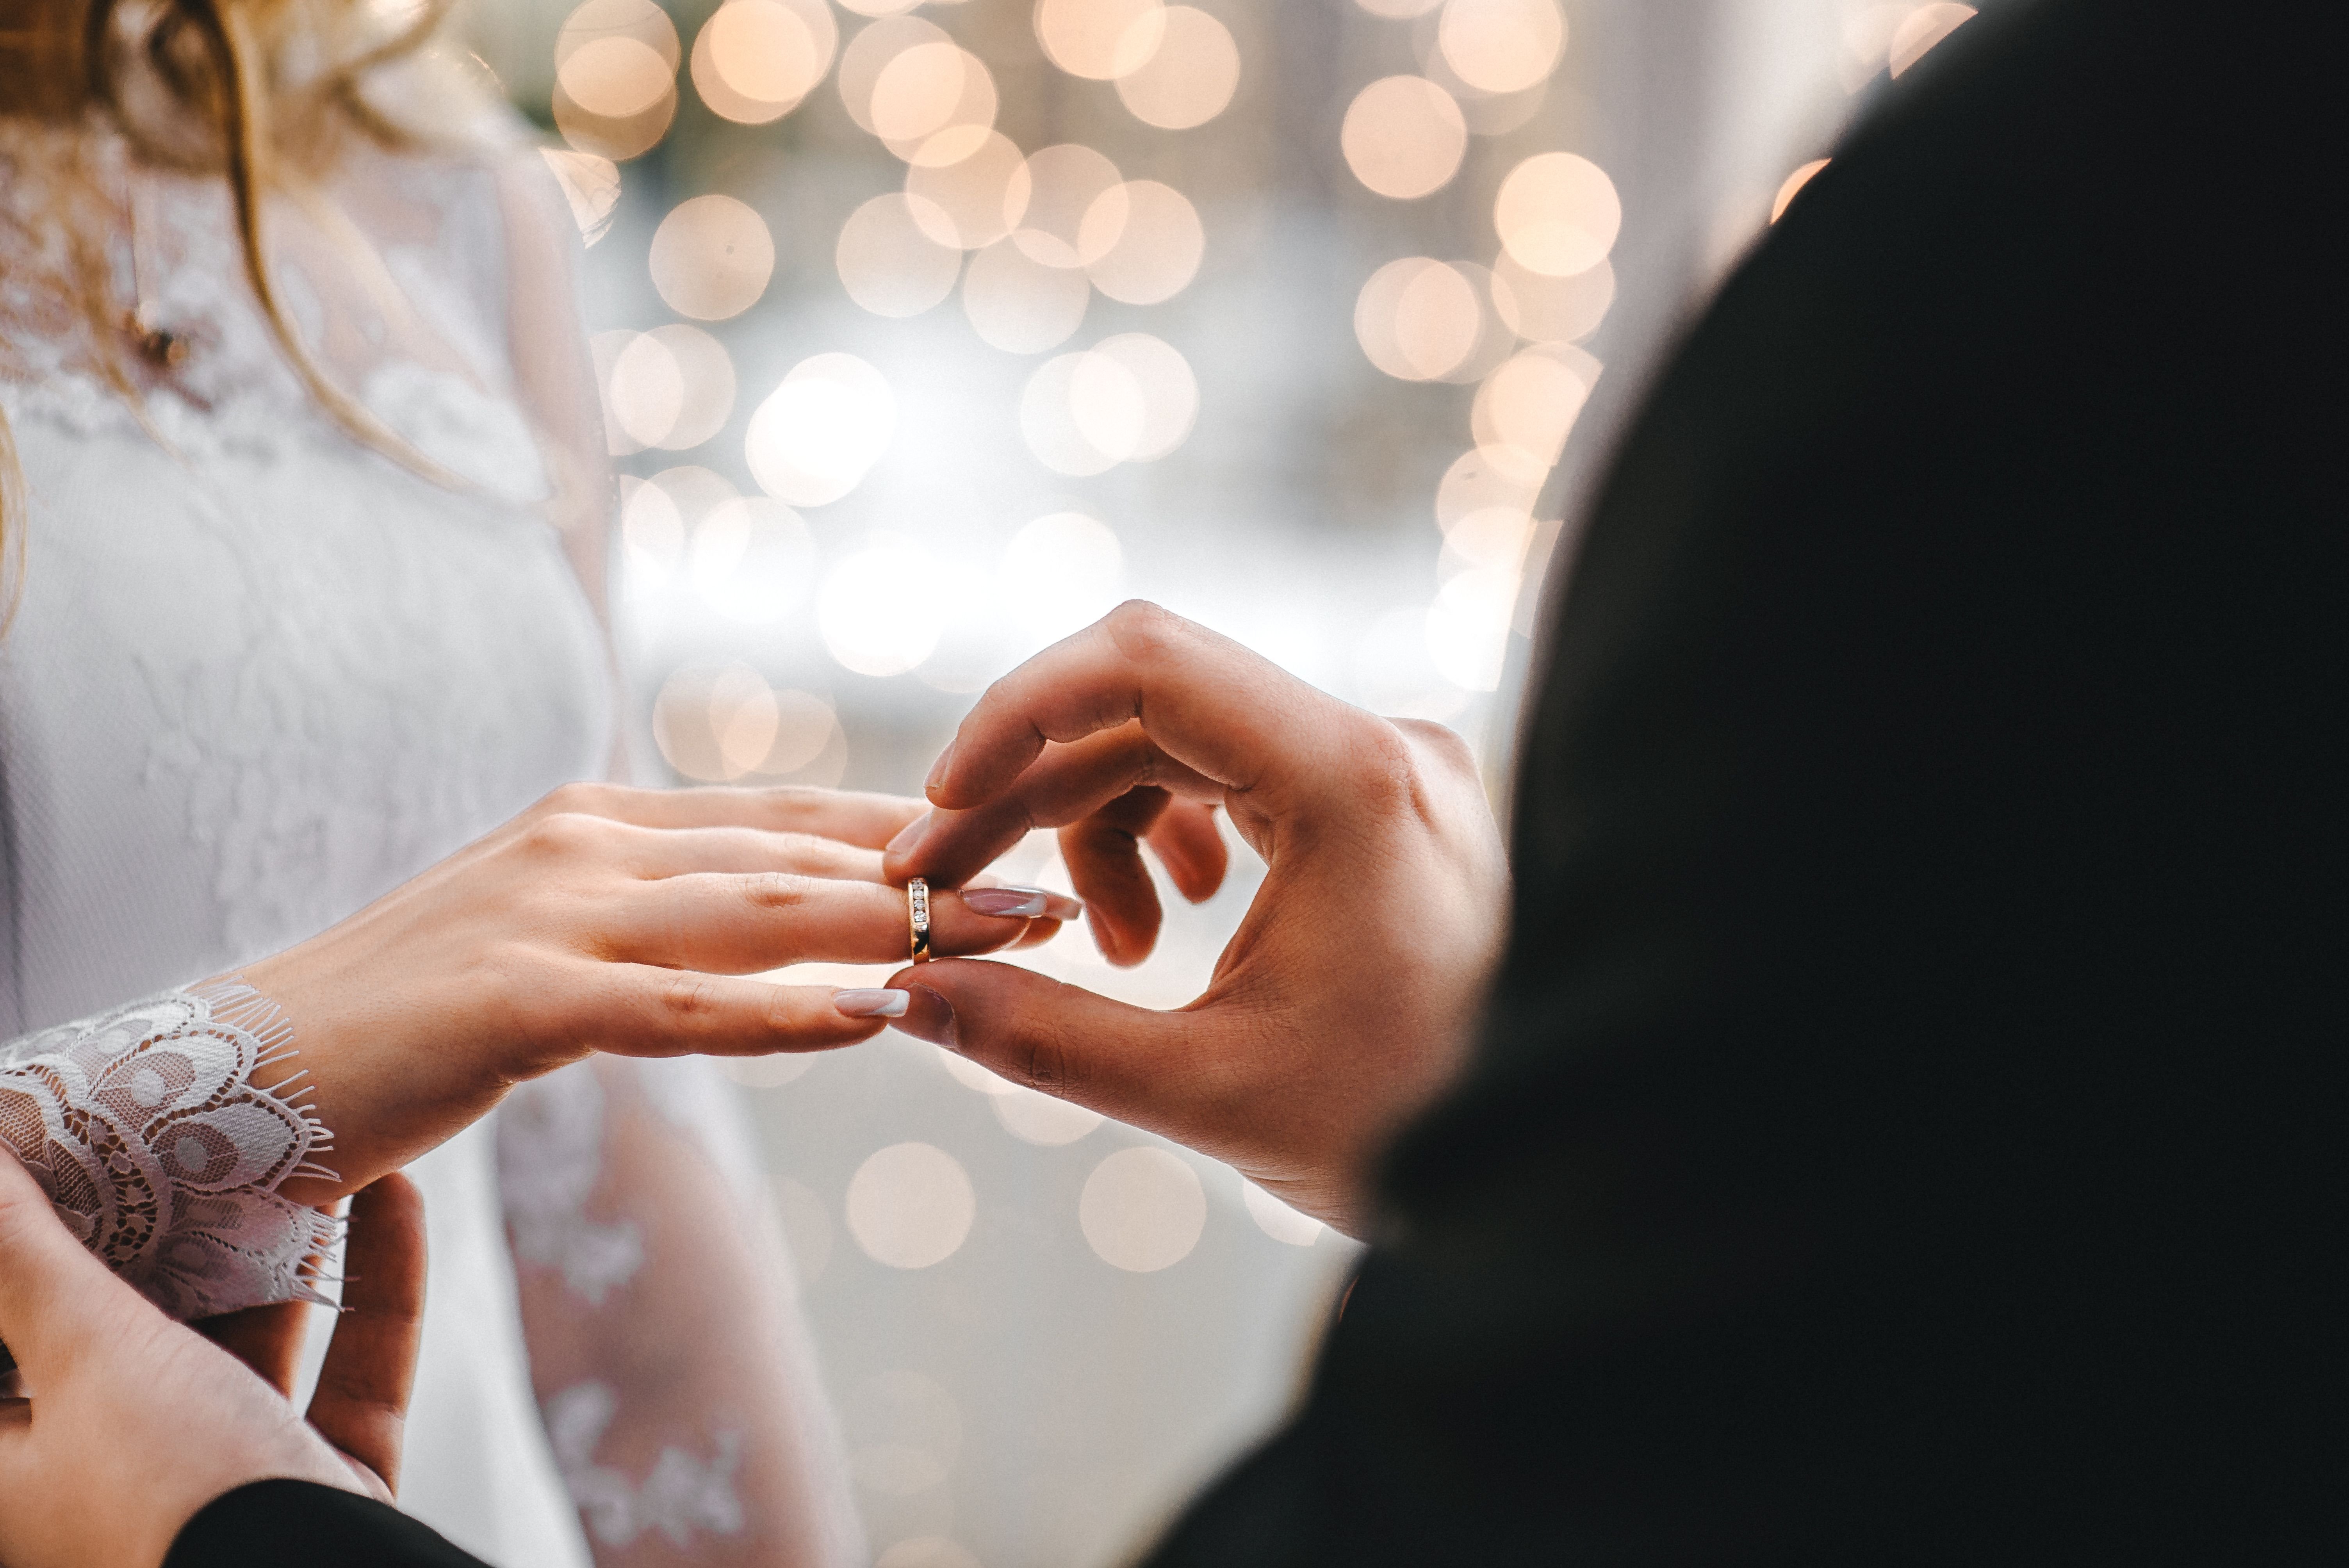 A man puts a wedding ring on a woman's finger.  ┃ Source: Shutterstock